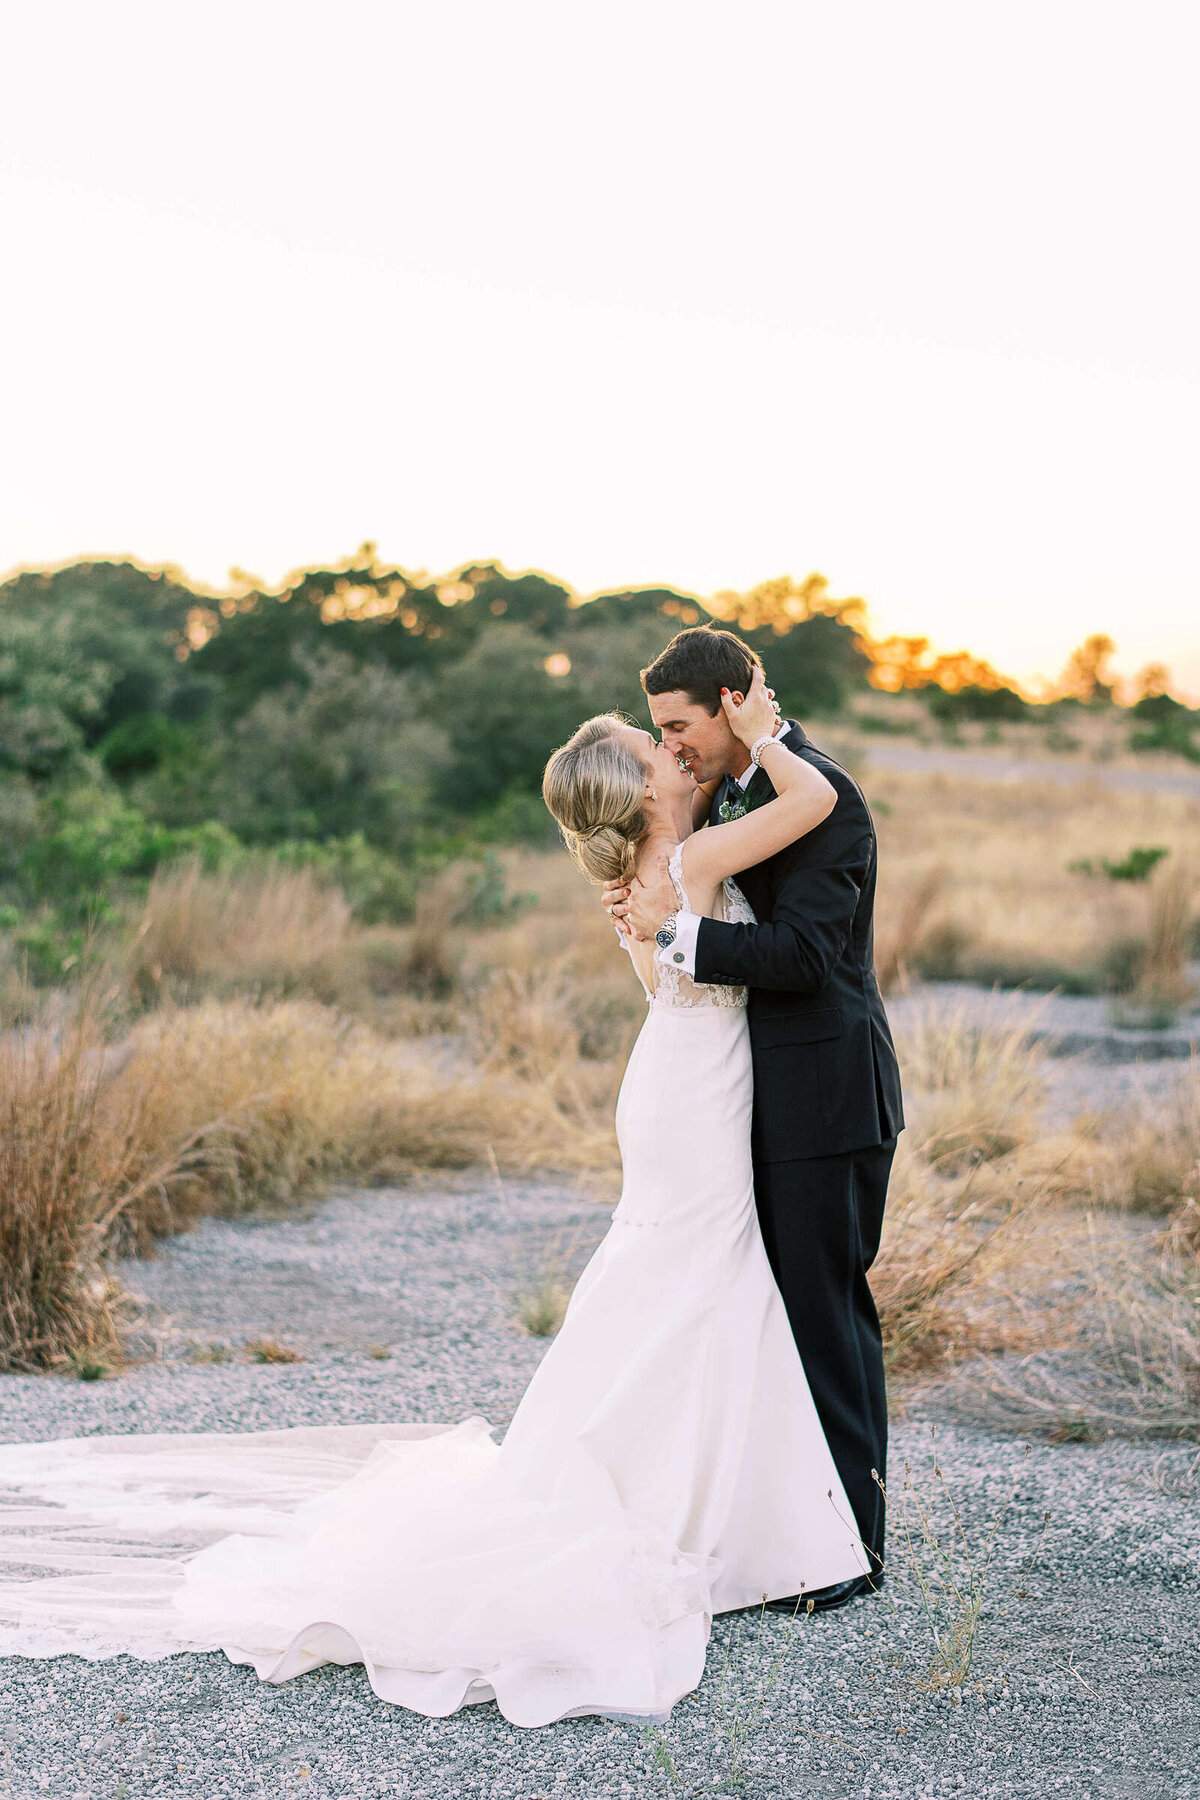 Bride and groom embrace in desert hill country